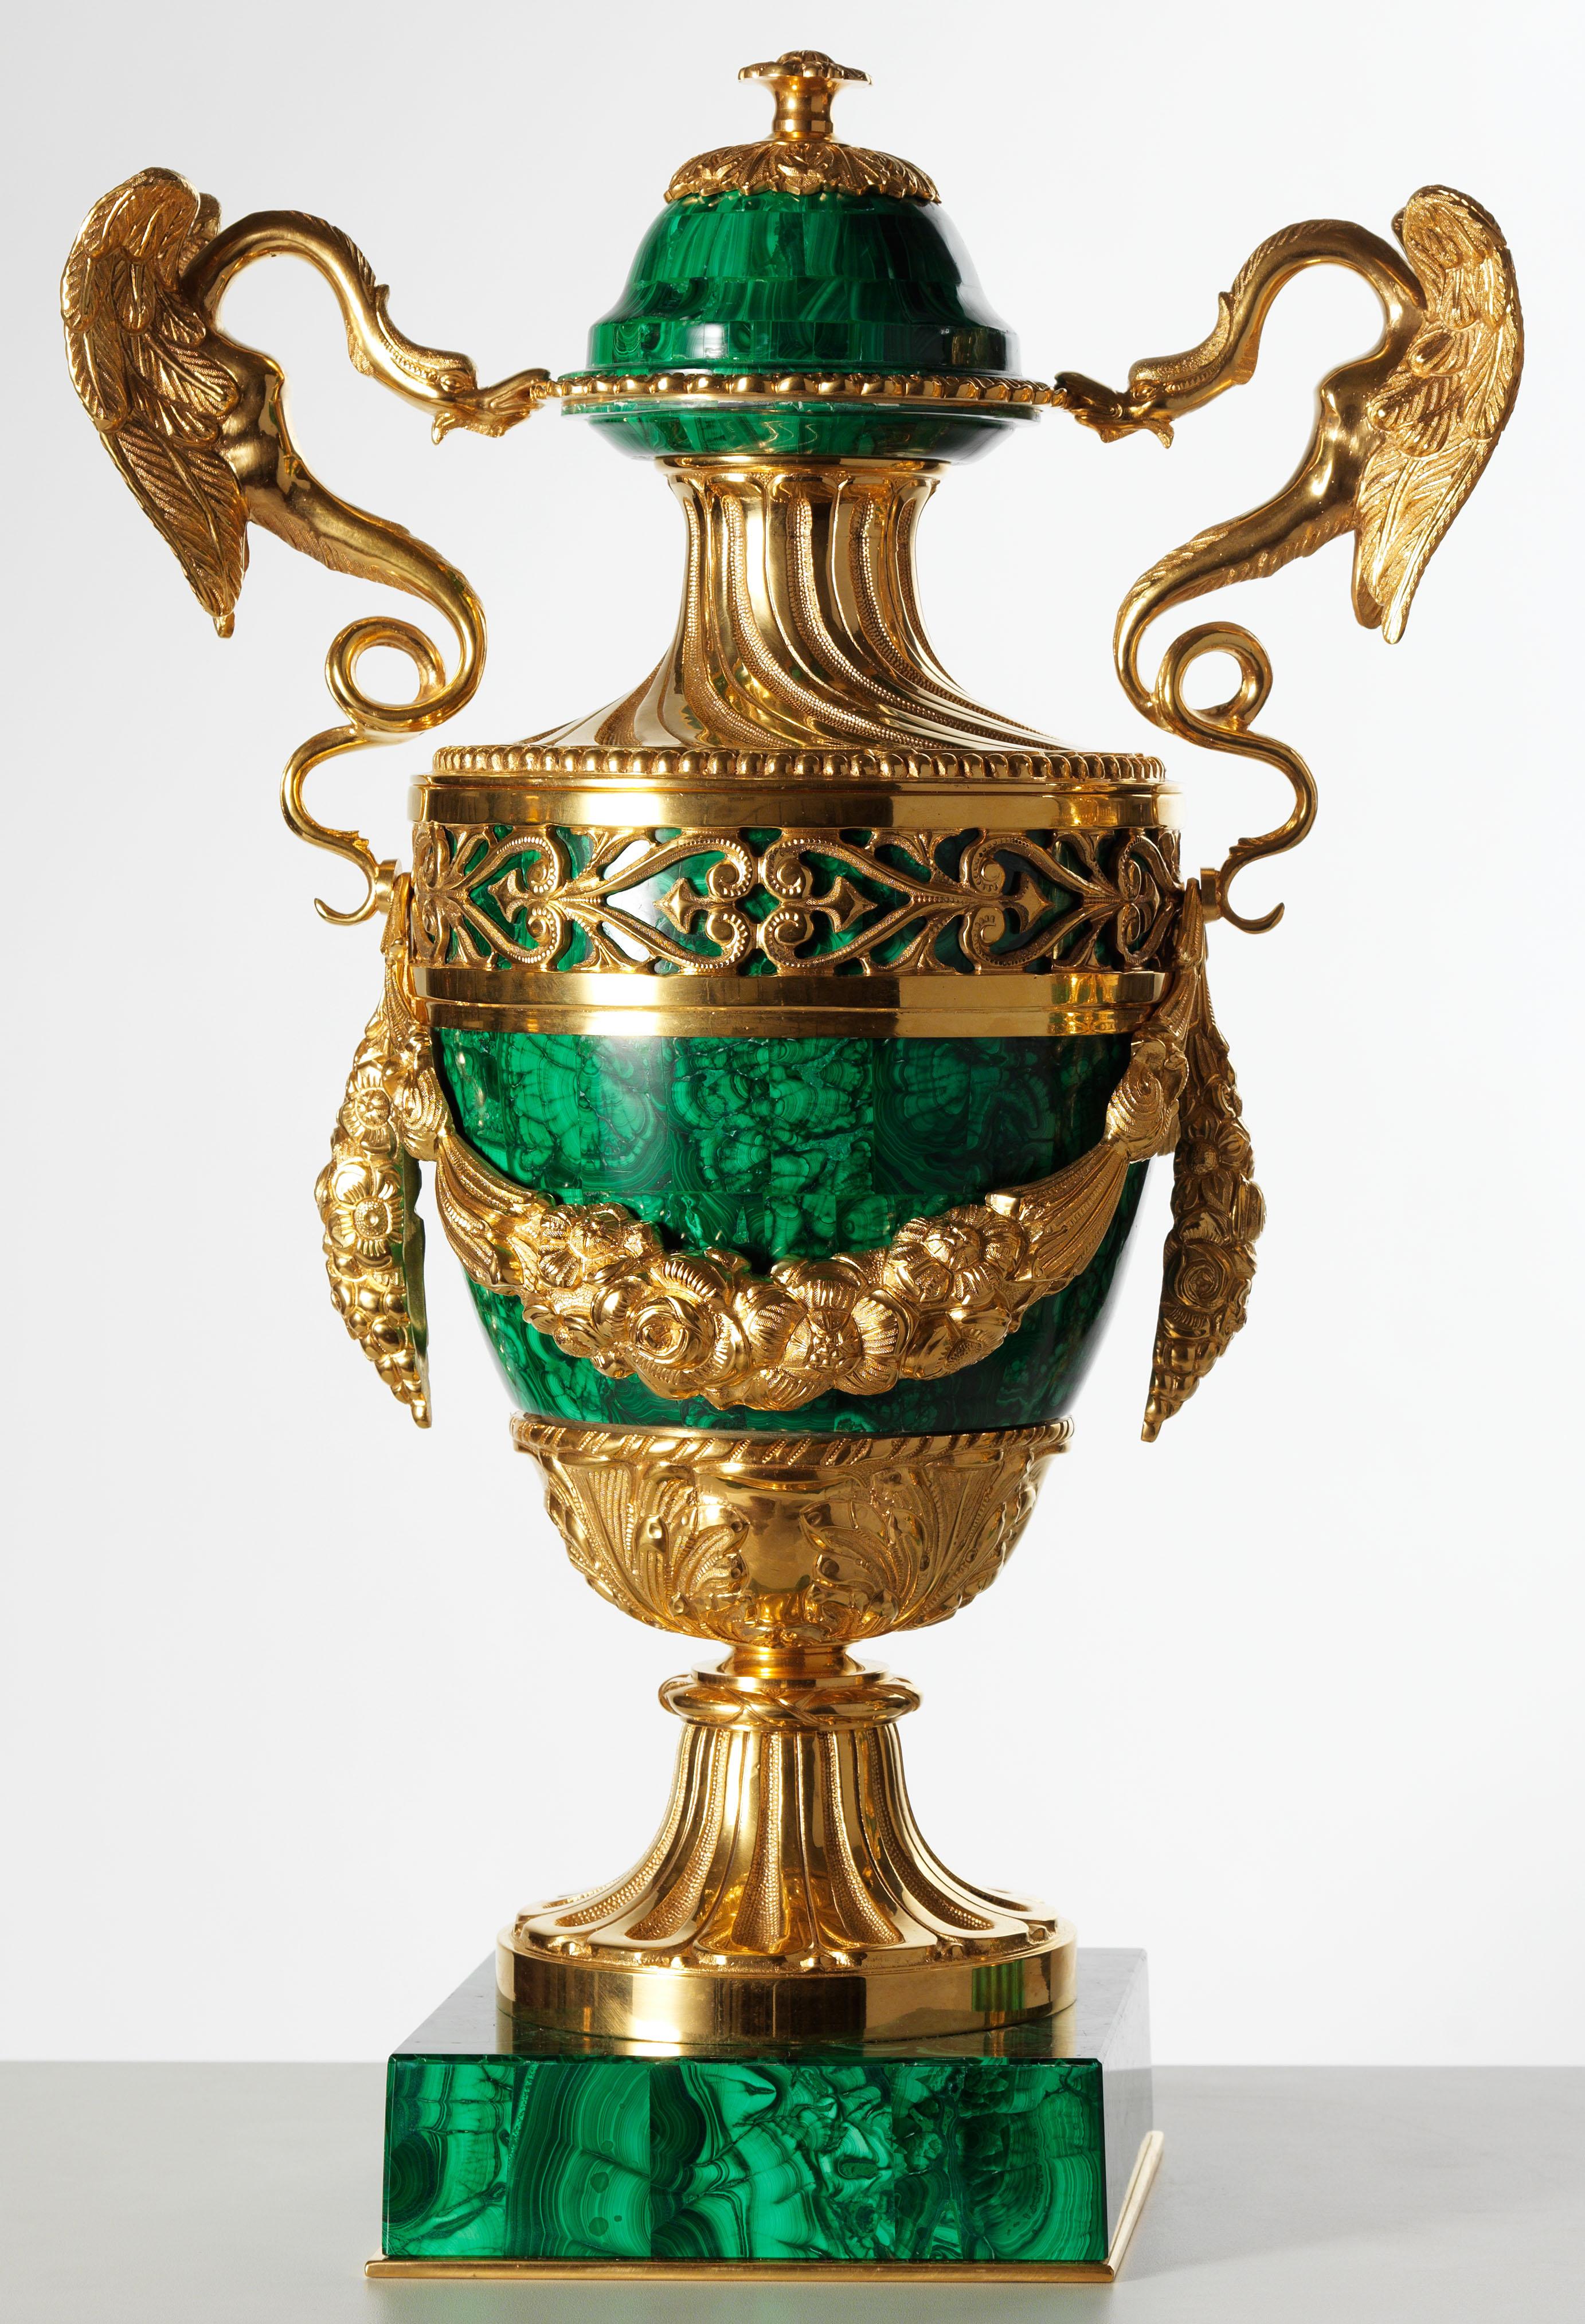 Pair of neoclassical style gilt bronze and malachite urns. They have an ovoid form veneered with malachite all-over. The urns feature a full chiseled gilt bronze mounts: the most impressive and artistic elements are the twin dragon-form handles,